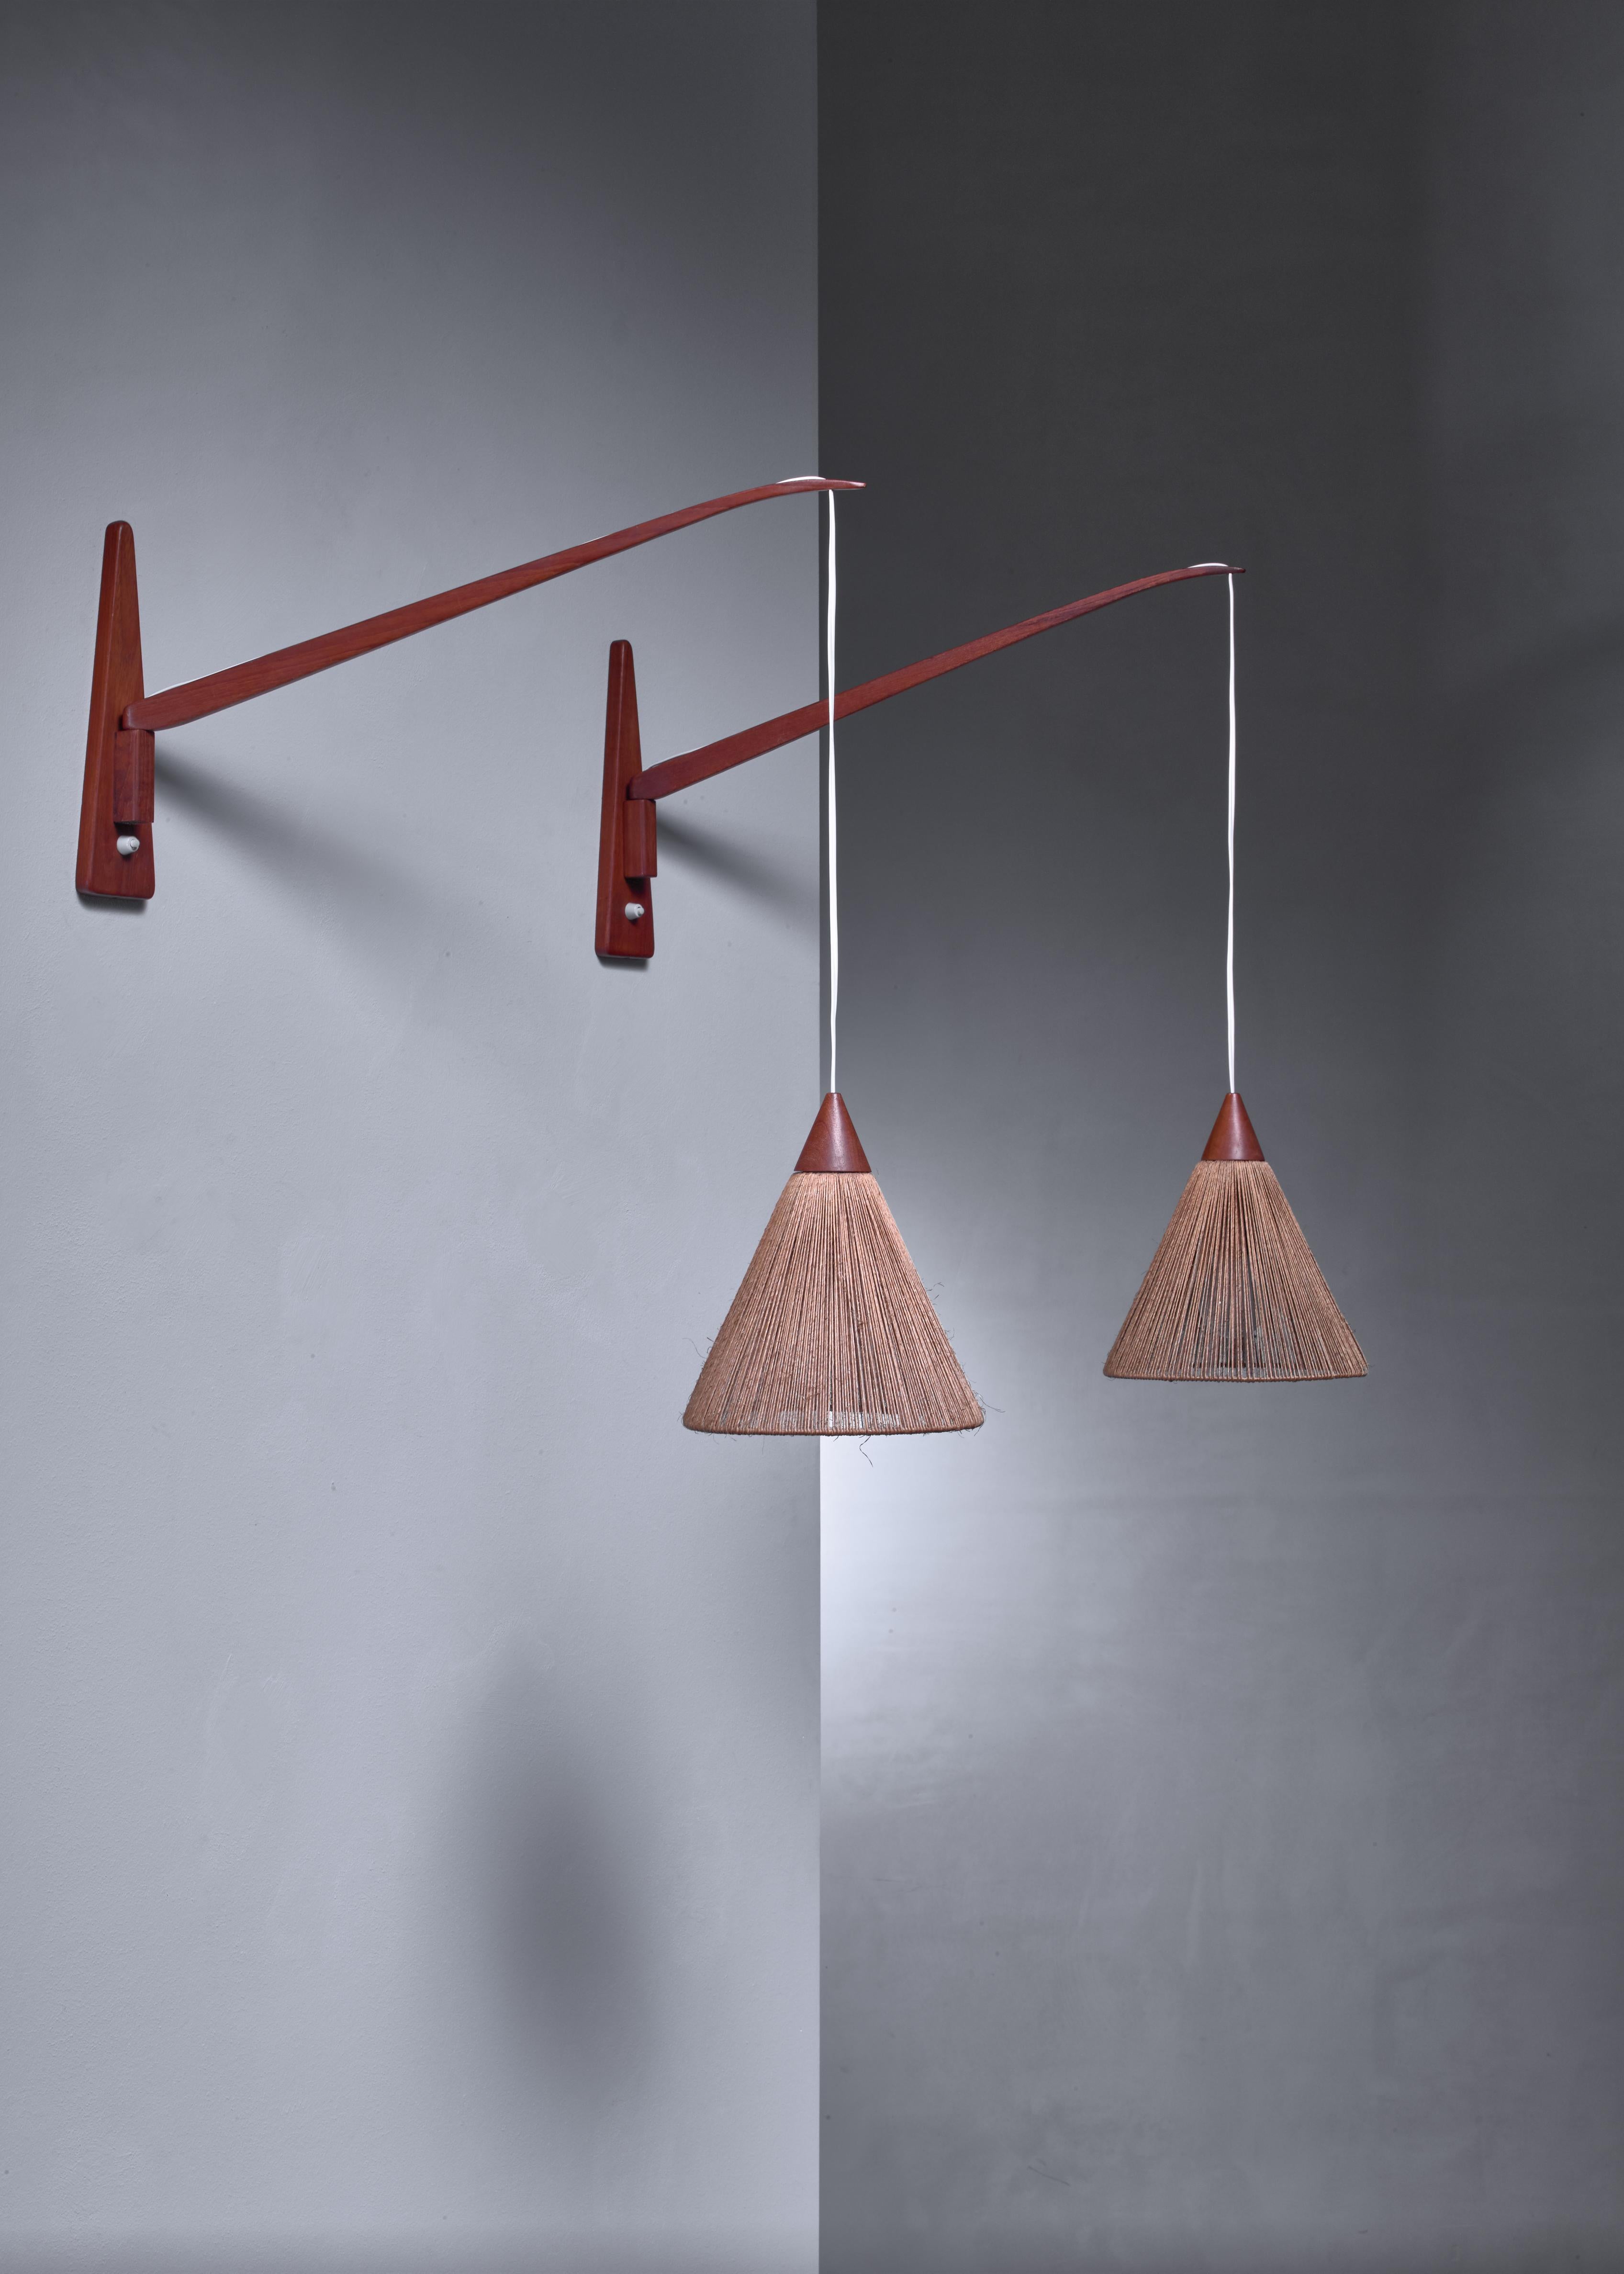 A pair of swiveling wall lamps attributed to Ib Fabiansen for Fog & Mørup, Denmark. The lamps are made of teak with a shade made of rope on a metal frame and cross over between bohemian and Scandinavian Modern.